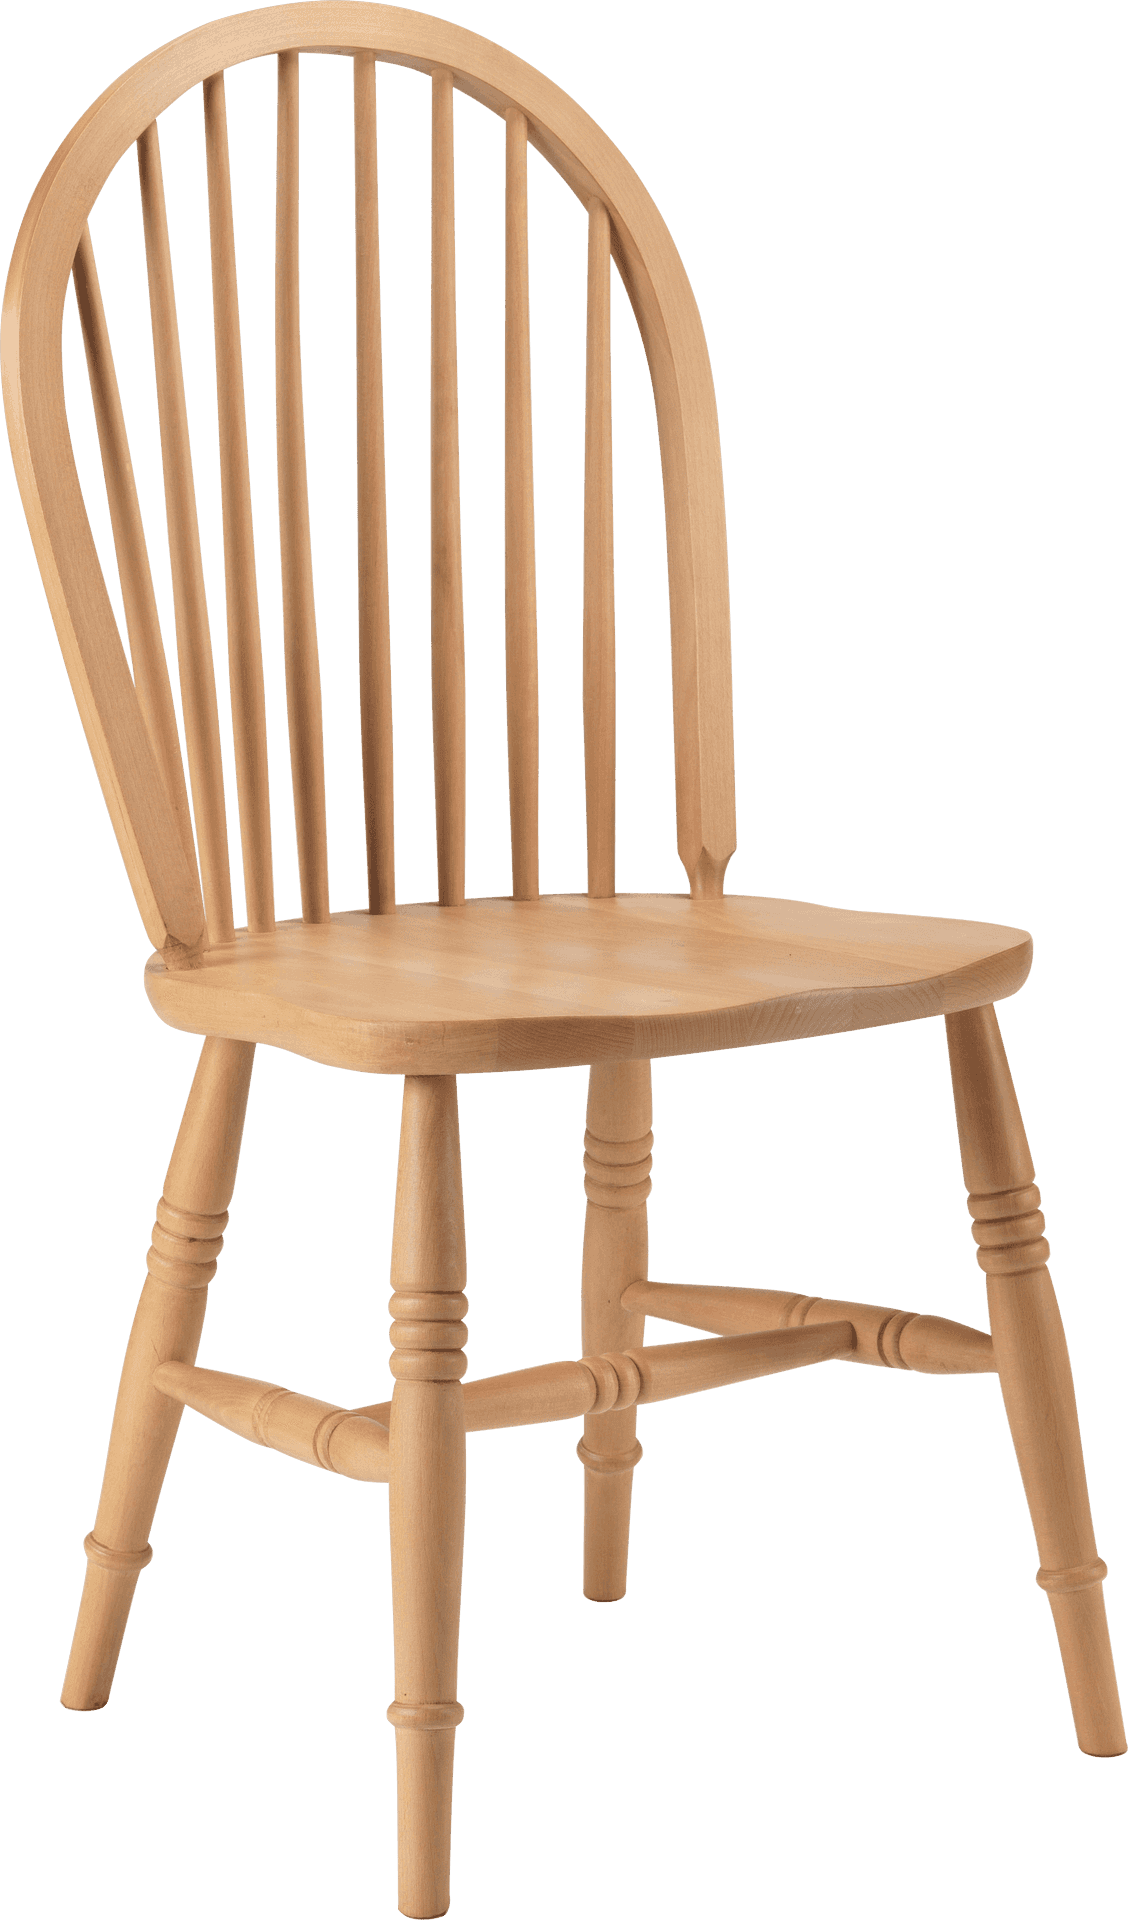 Wooden Spindle Back Chair Isolated PNG